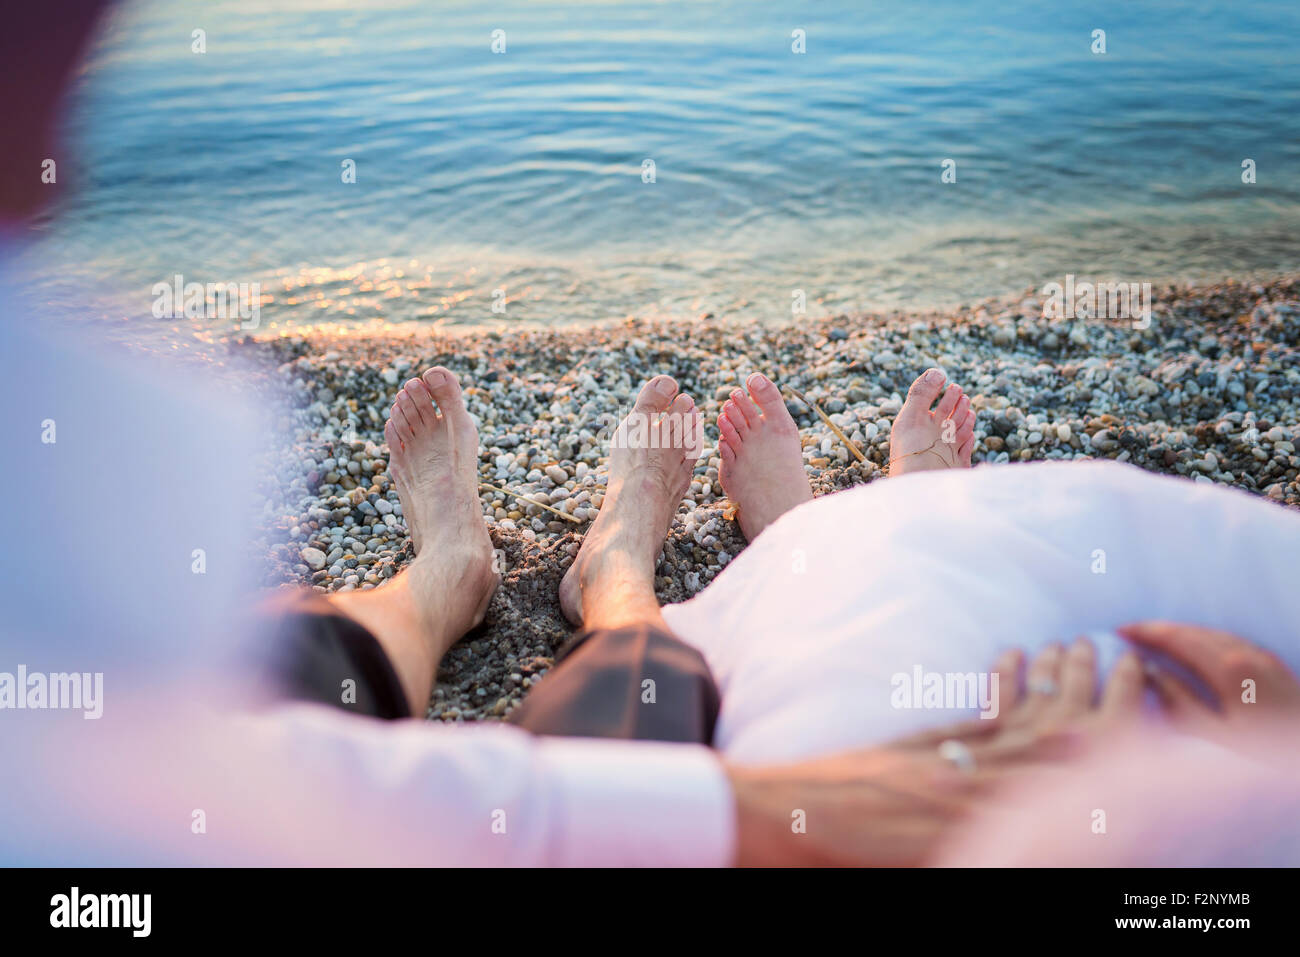 Feet of a bride and groom sitting on a beach Stock Photo